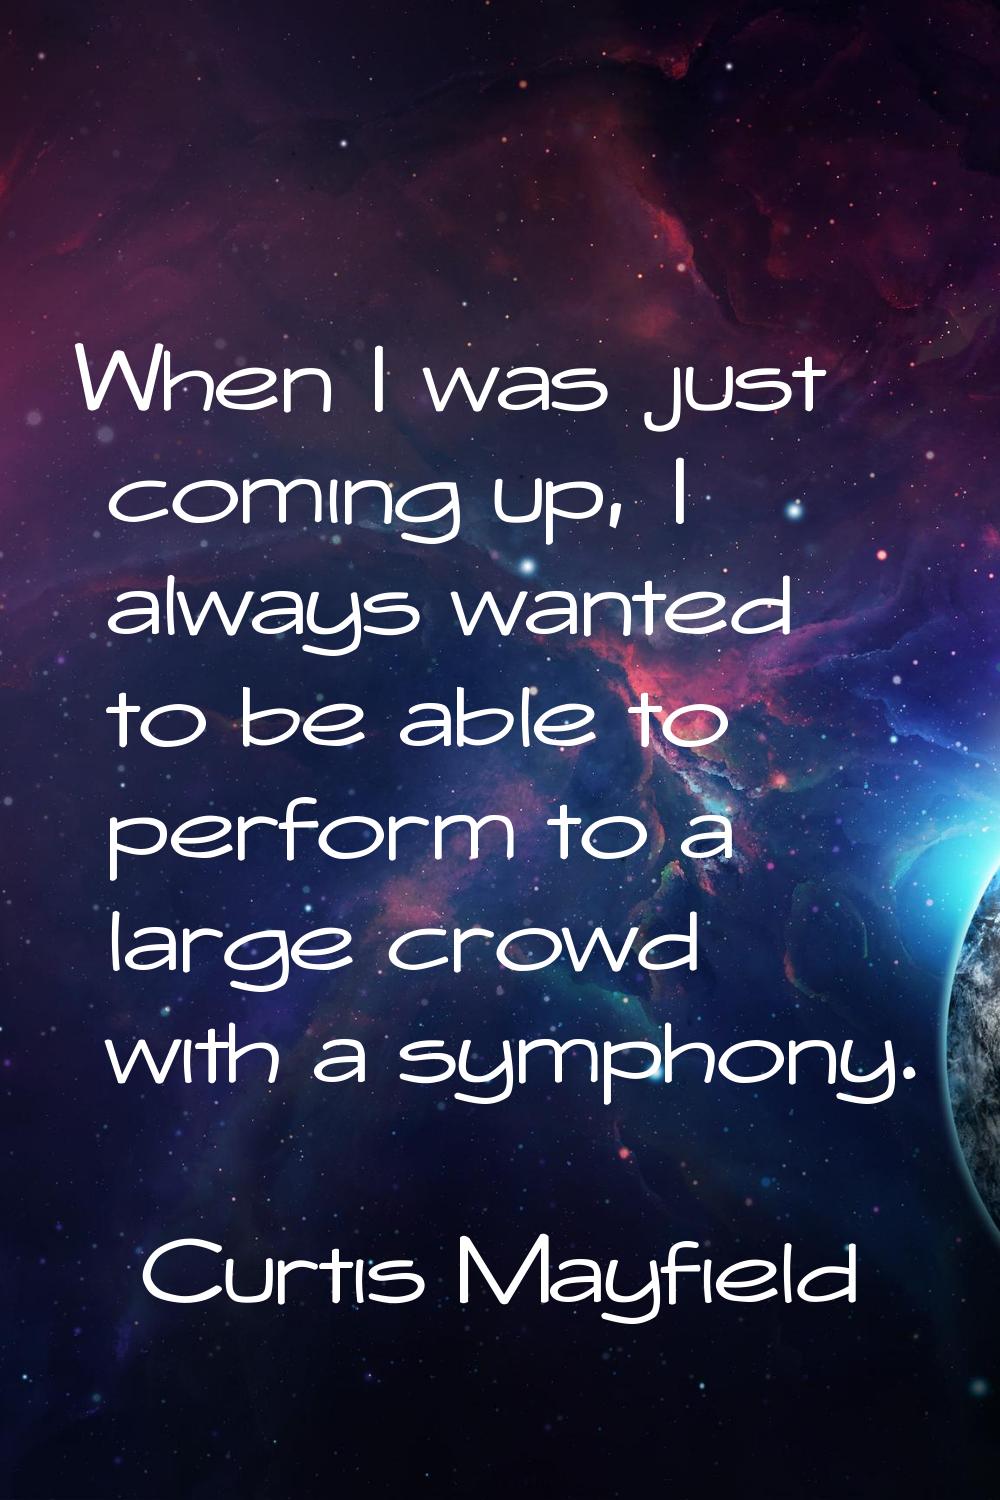 When I was just coming up, I always wanted to be able to perform to a large crowd with a symphony.